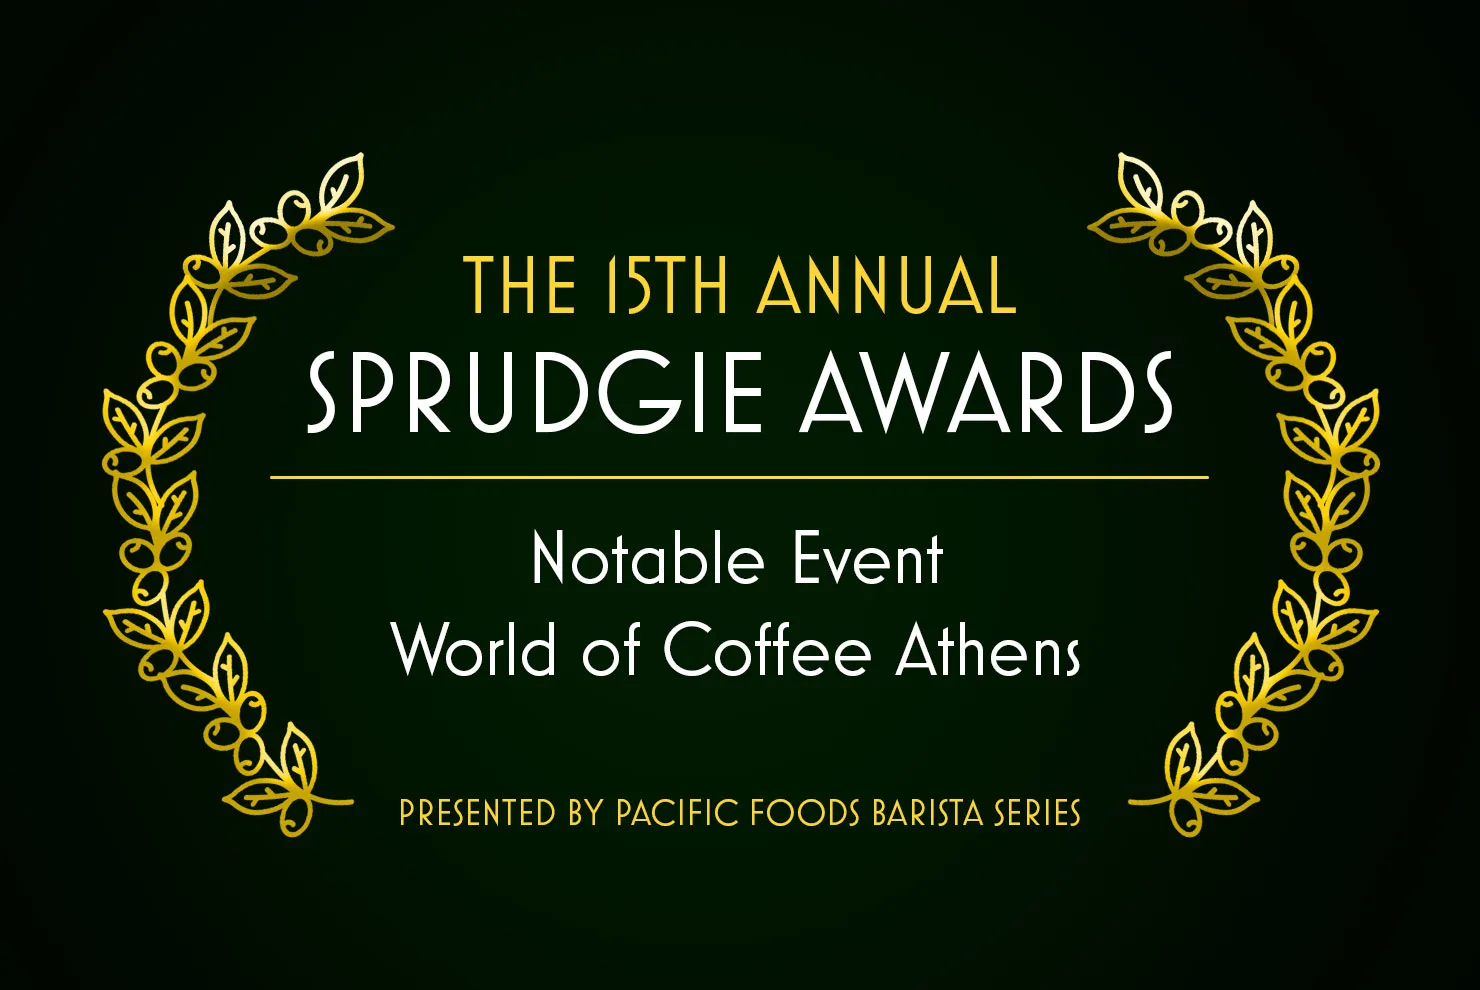 sprudgie awards 15 notable event